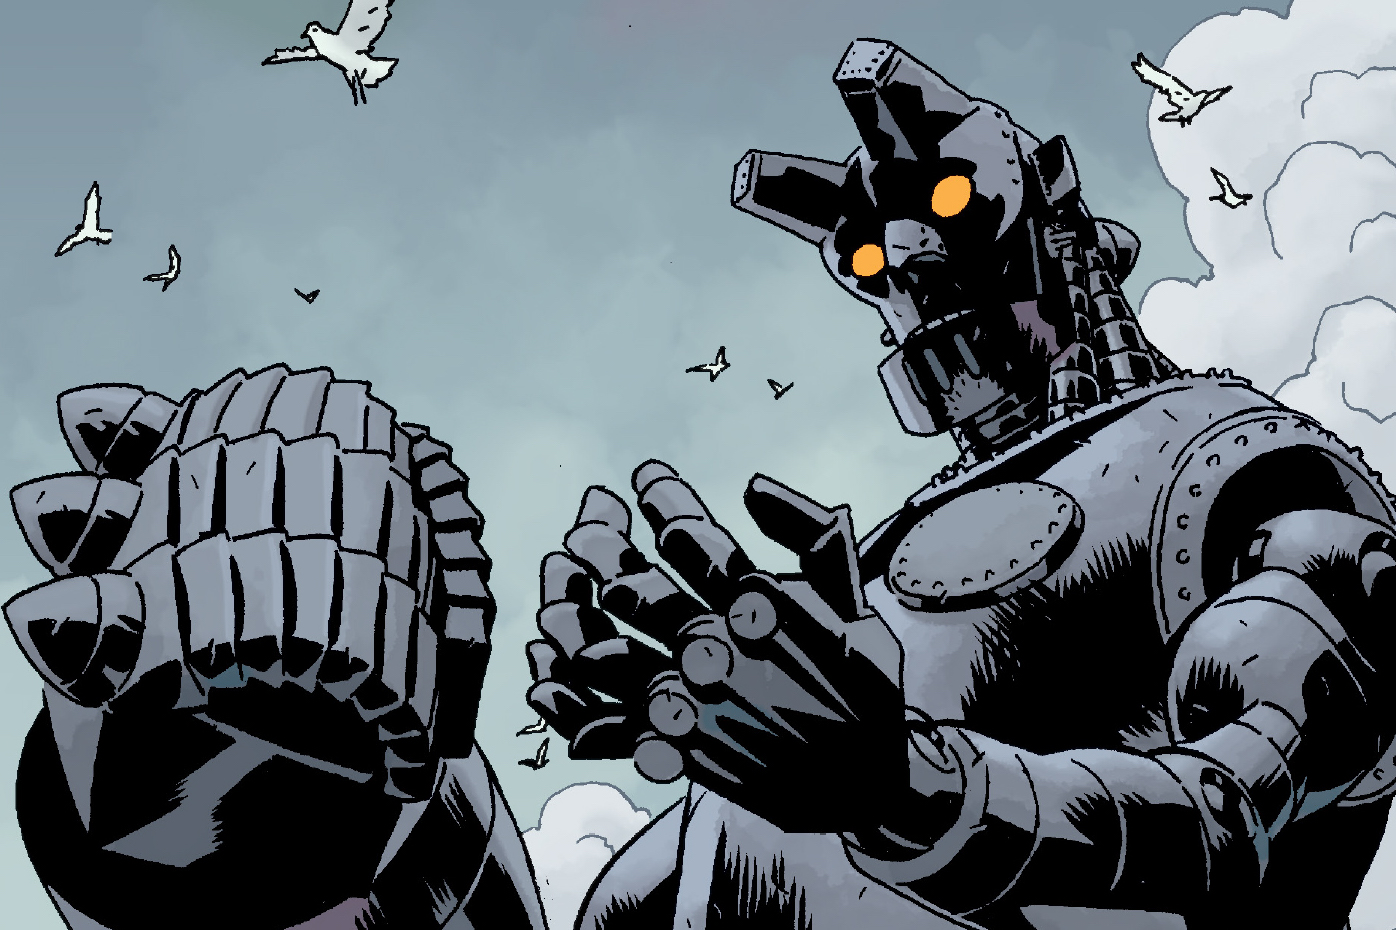 Giant Robot Hellboy looks at his hands as if to say “Son of a... They turned me into a giant robot!” in Giant Robot Hellboy #1.